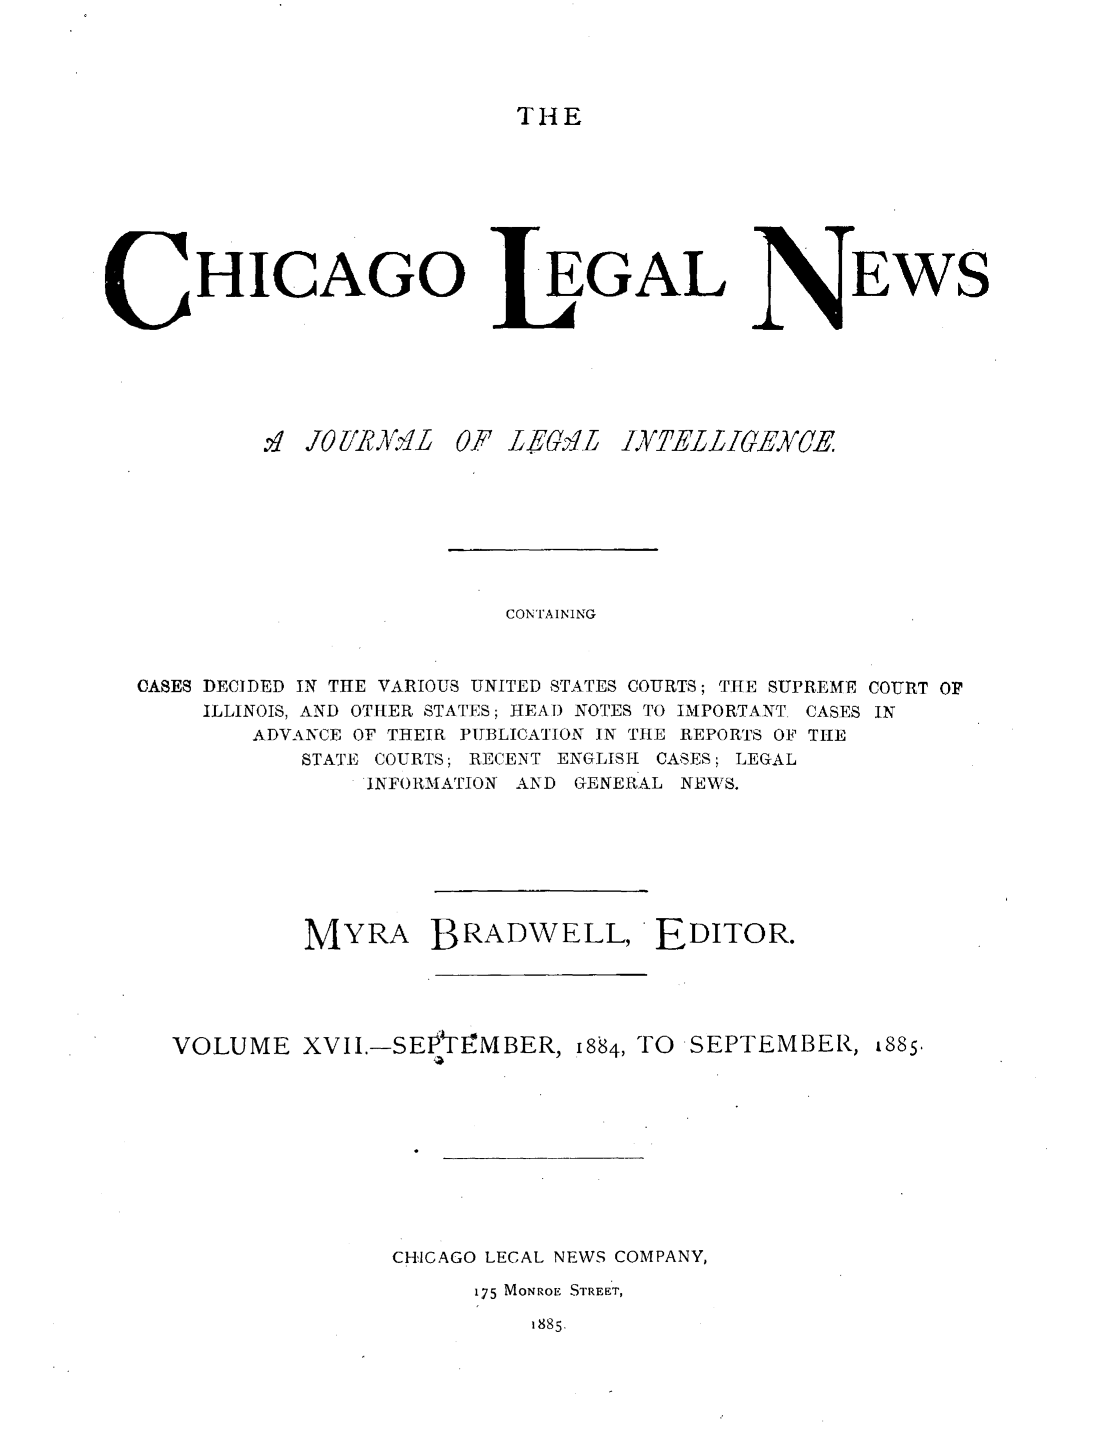 handle is hein.journals/chiclene17 and id is 1 raw text is: THEHICAGO'q JO[1/RA 4L 0EGAL'F igu6(VirEWSCONTAININGCASES DECIDED IN THE VARIOUS UNITED STATES COURTS; THE SUPREME COURT OFILLINOIS, AND OTHER STATES; HEAT) NOTES TO IMPORTANT. CASES INADVANCE OF THEIR PUBLICATION IN THE REPORTS OF THESTATE COURTS; RECENT ENGLISH CASES; LEGALINFORMATION AND GENERAL NEWS.MYRA BRADWELL, EDITOR.VOLUME XVII.-SEtIMBER, 884, TO SEPTEMBER, i885.CHICAGO LECAL NEWS COMPANY,175 MONROE STREET,1885.INTELIECE